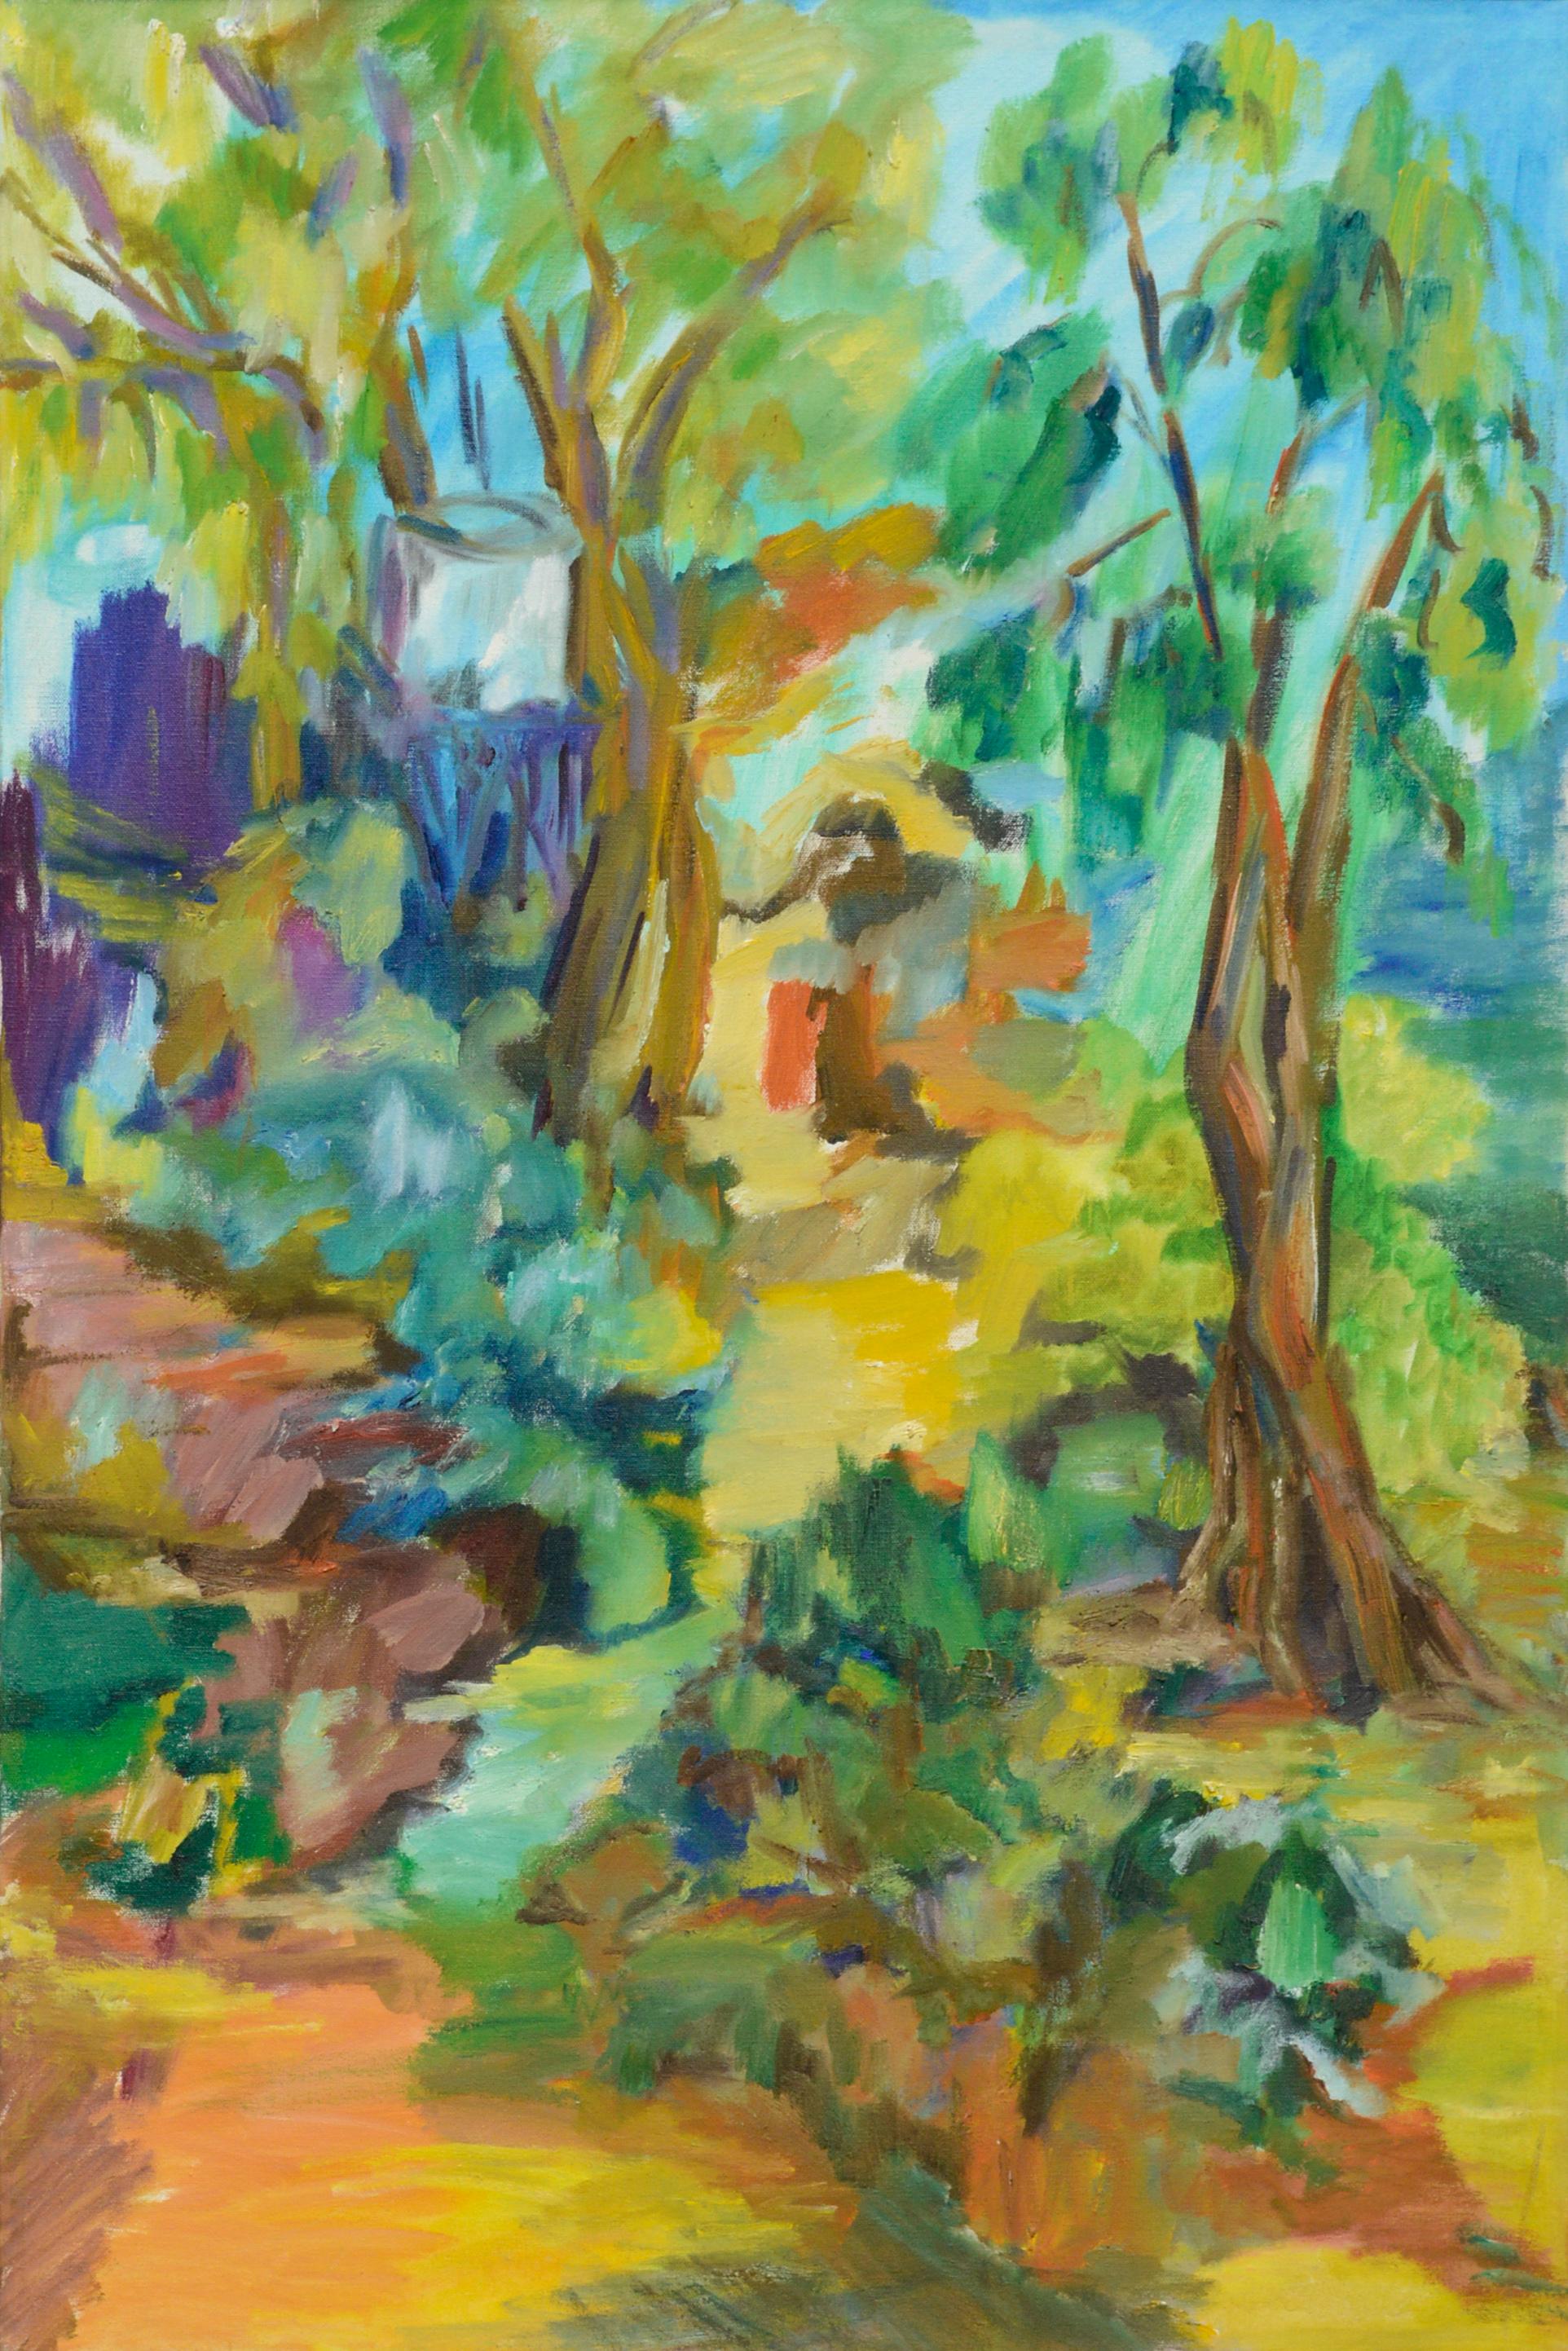 Path Through the Trees, Colorful Abstracted Modern Figurative Landscape - Painting by Unknown